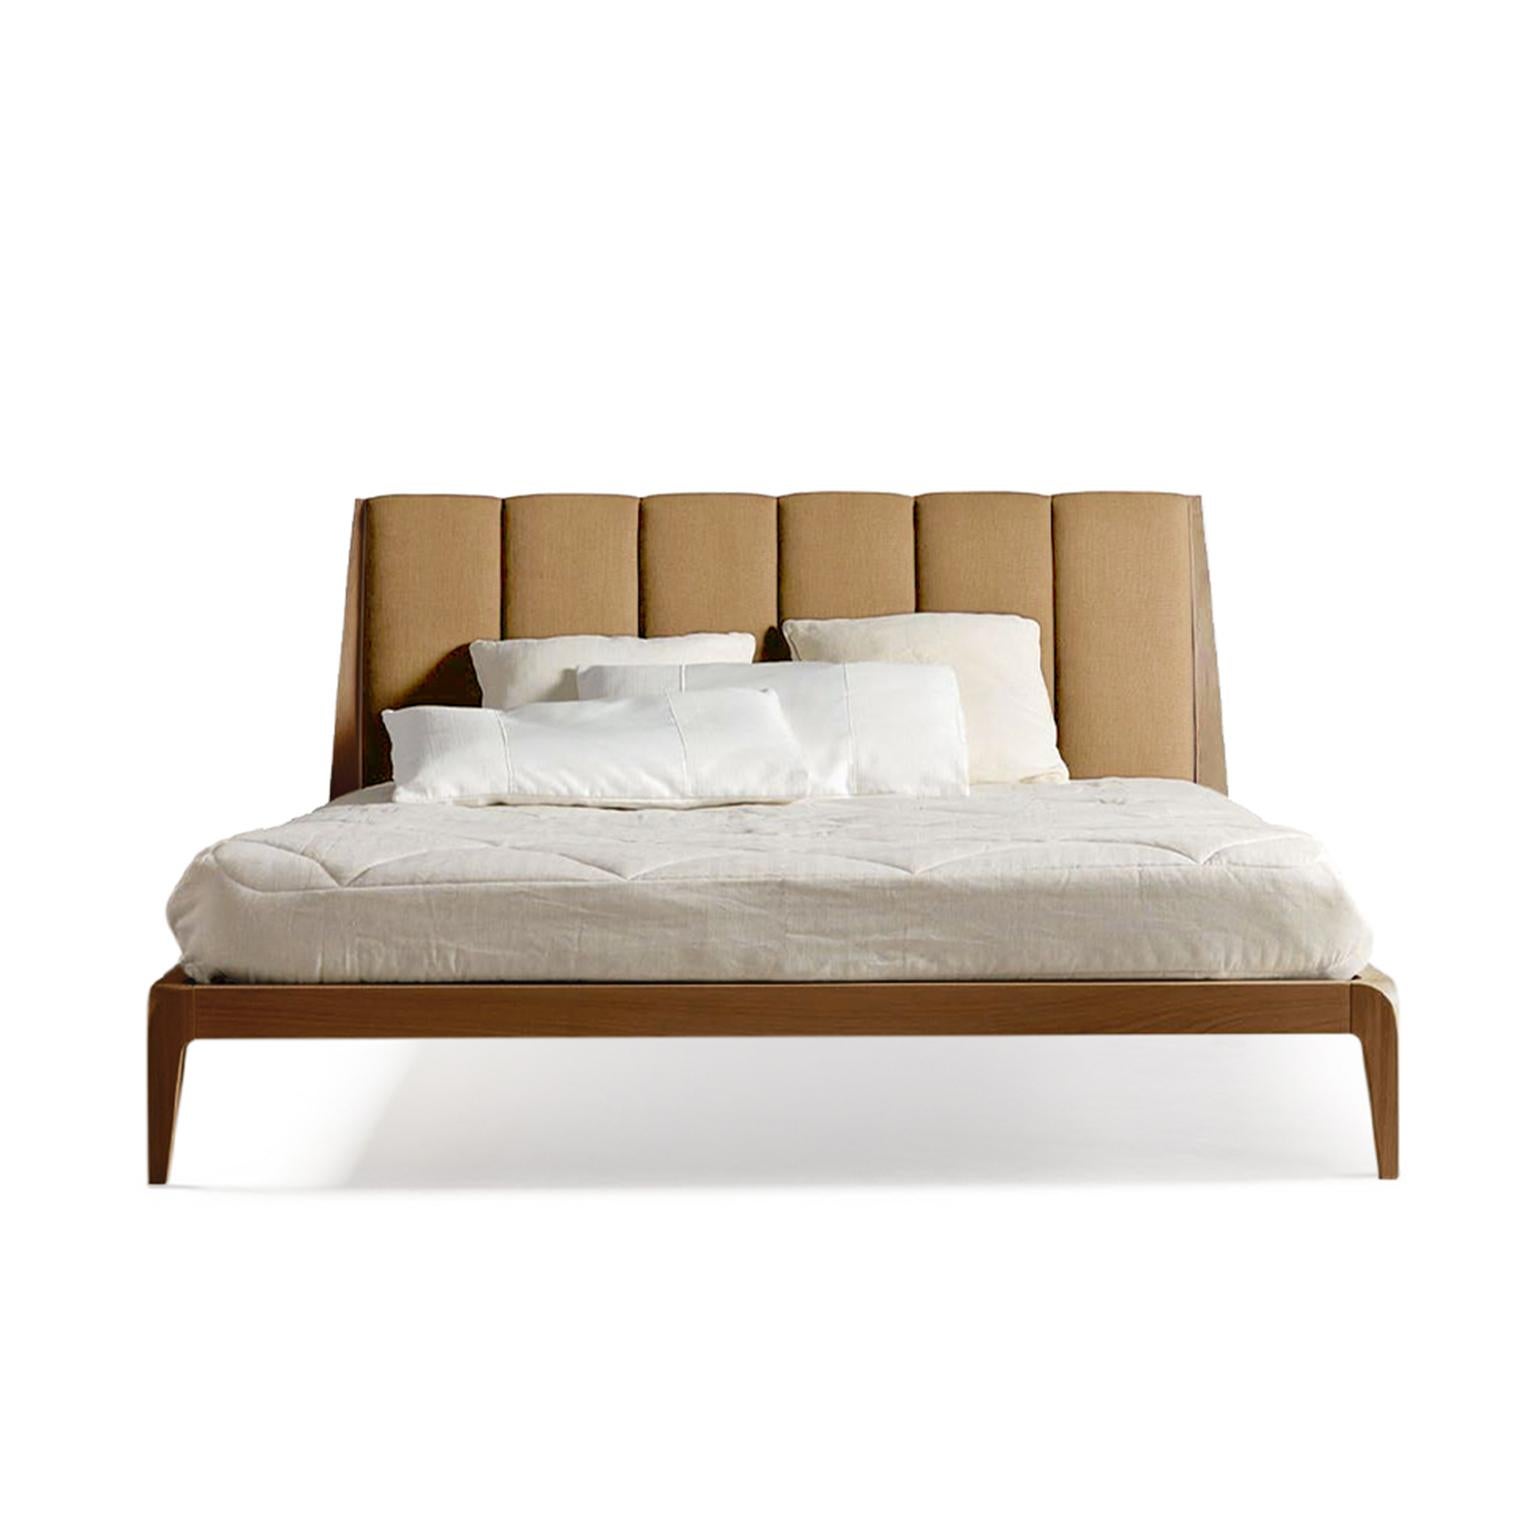 Verso Nord Solid Wood Bed, Walnut in Hand-Made Natural Finish, Contemporary For Sale 3